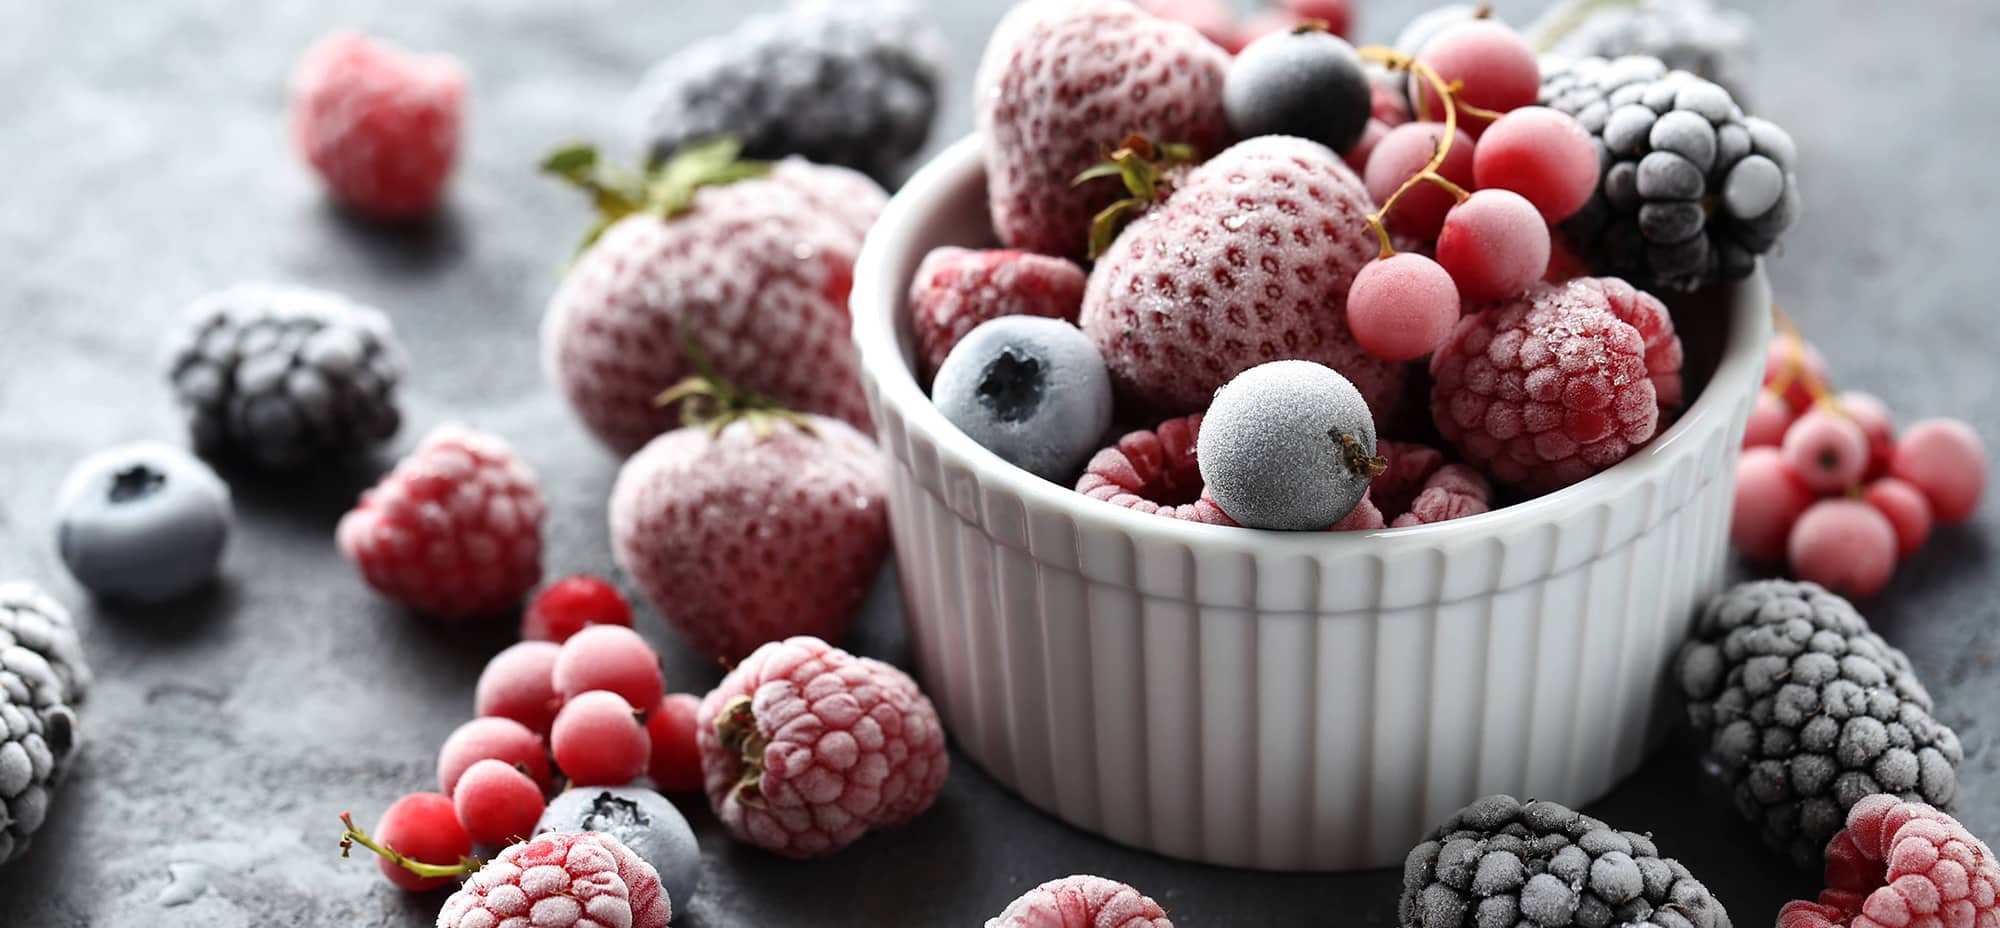 Image of frozen berries in a bowl